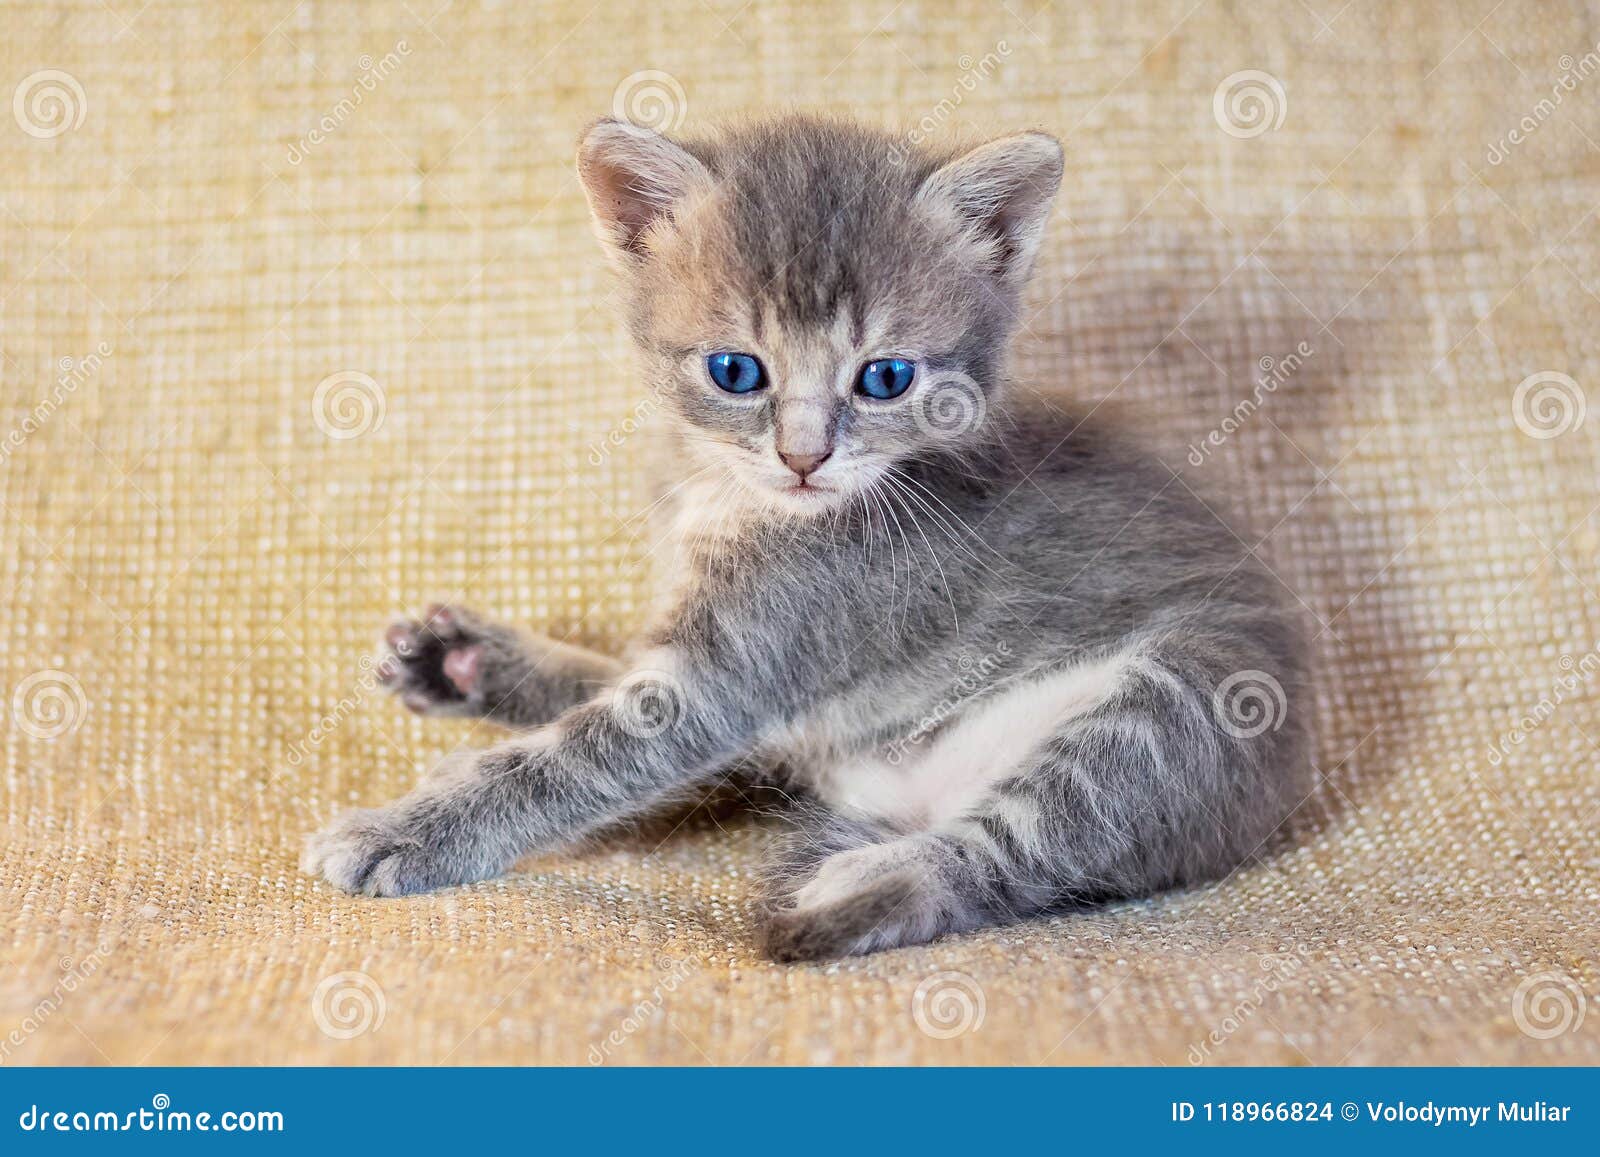 A Little Gray Kitten With Blue Eyes Lying Carelessly Photo In Stock Photo Image Of Expression Portrait